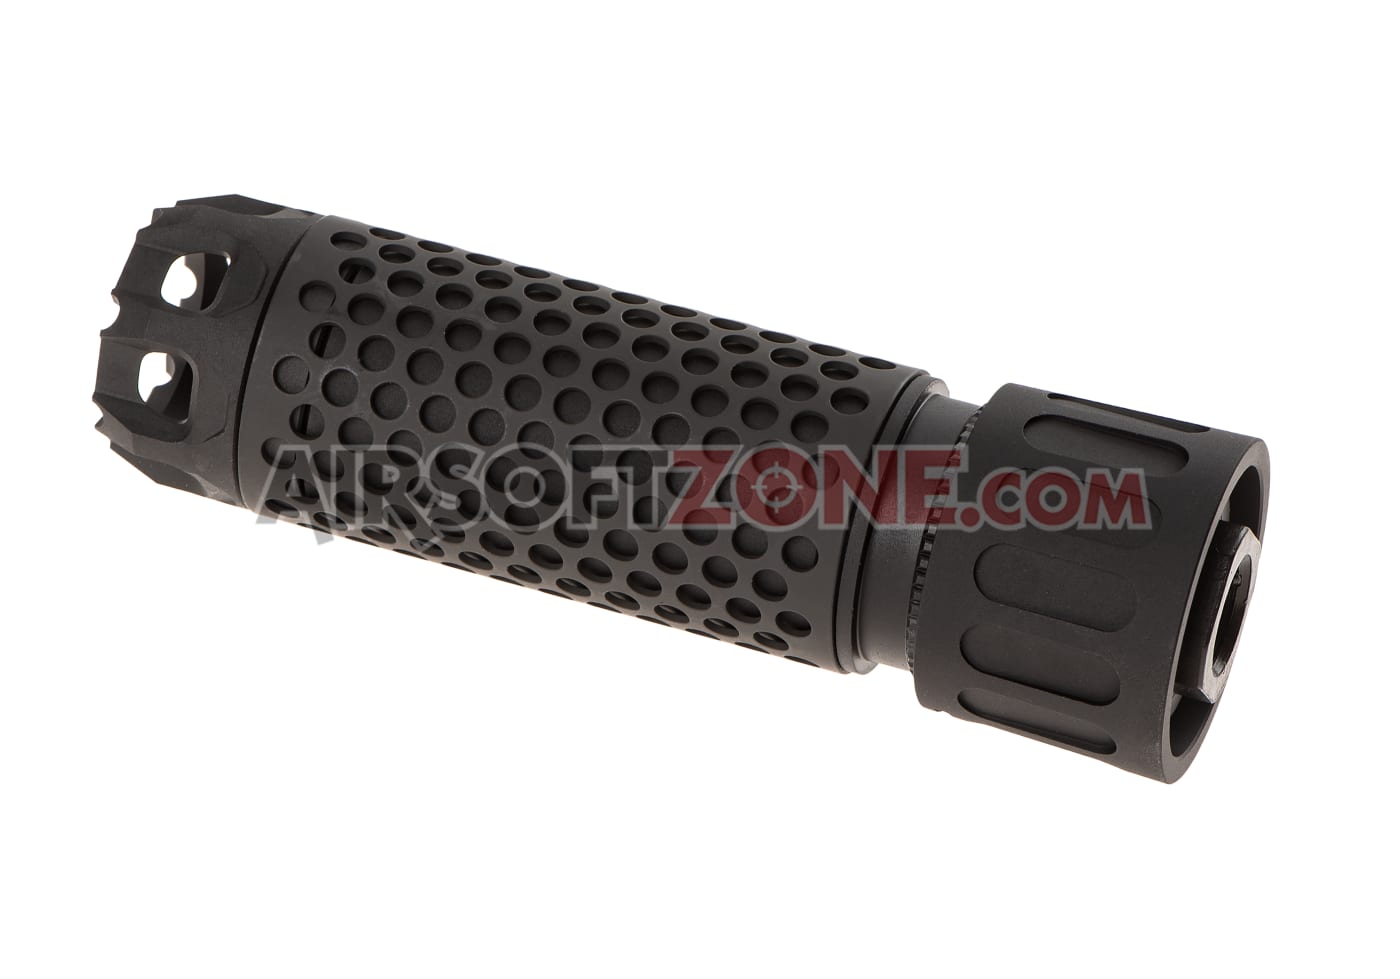 Acetech Bifrost Tracer Unit 14mm CCW (2024) - Airsoftzone